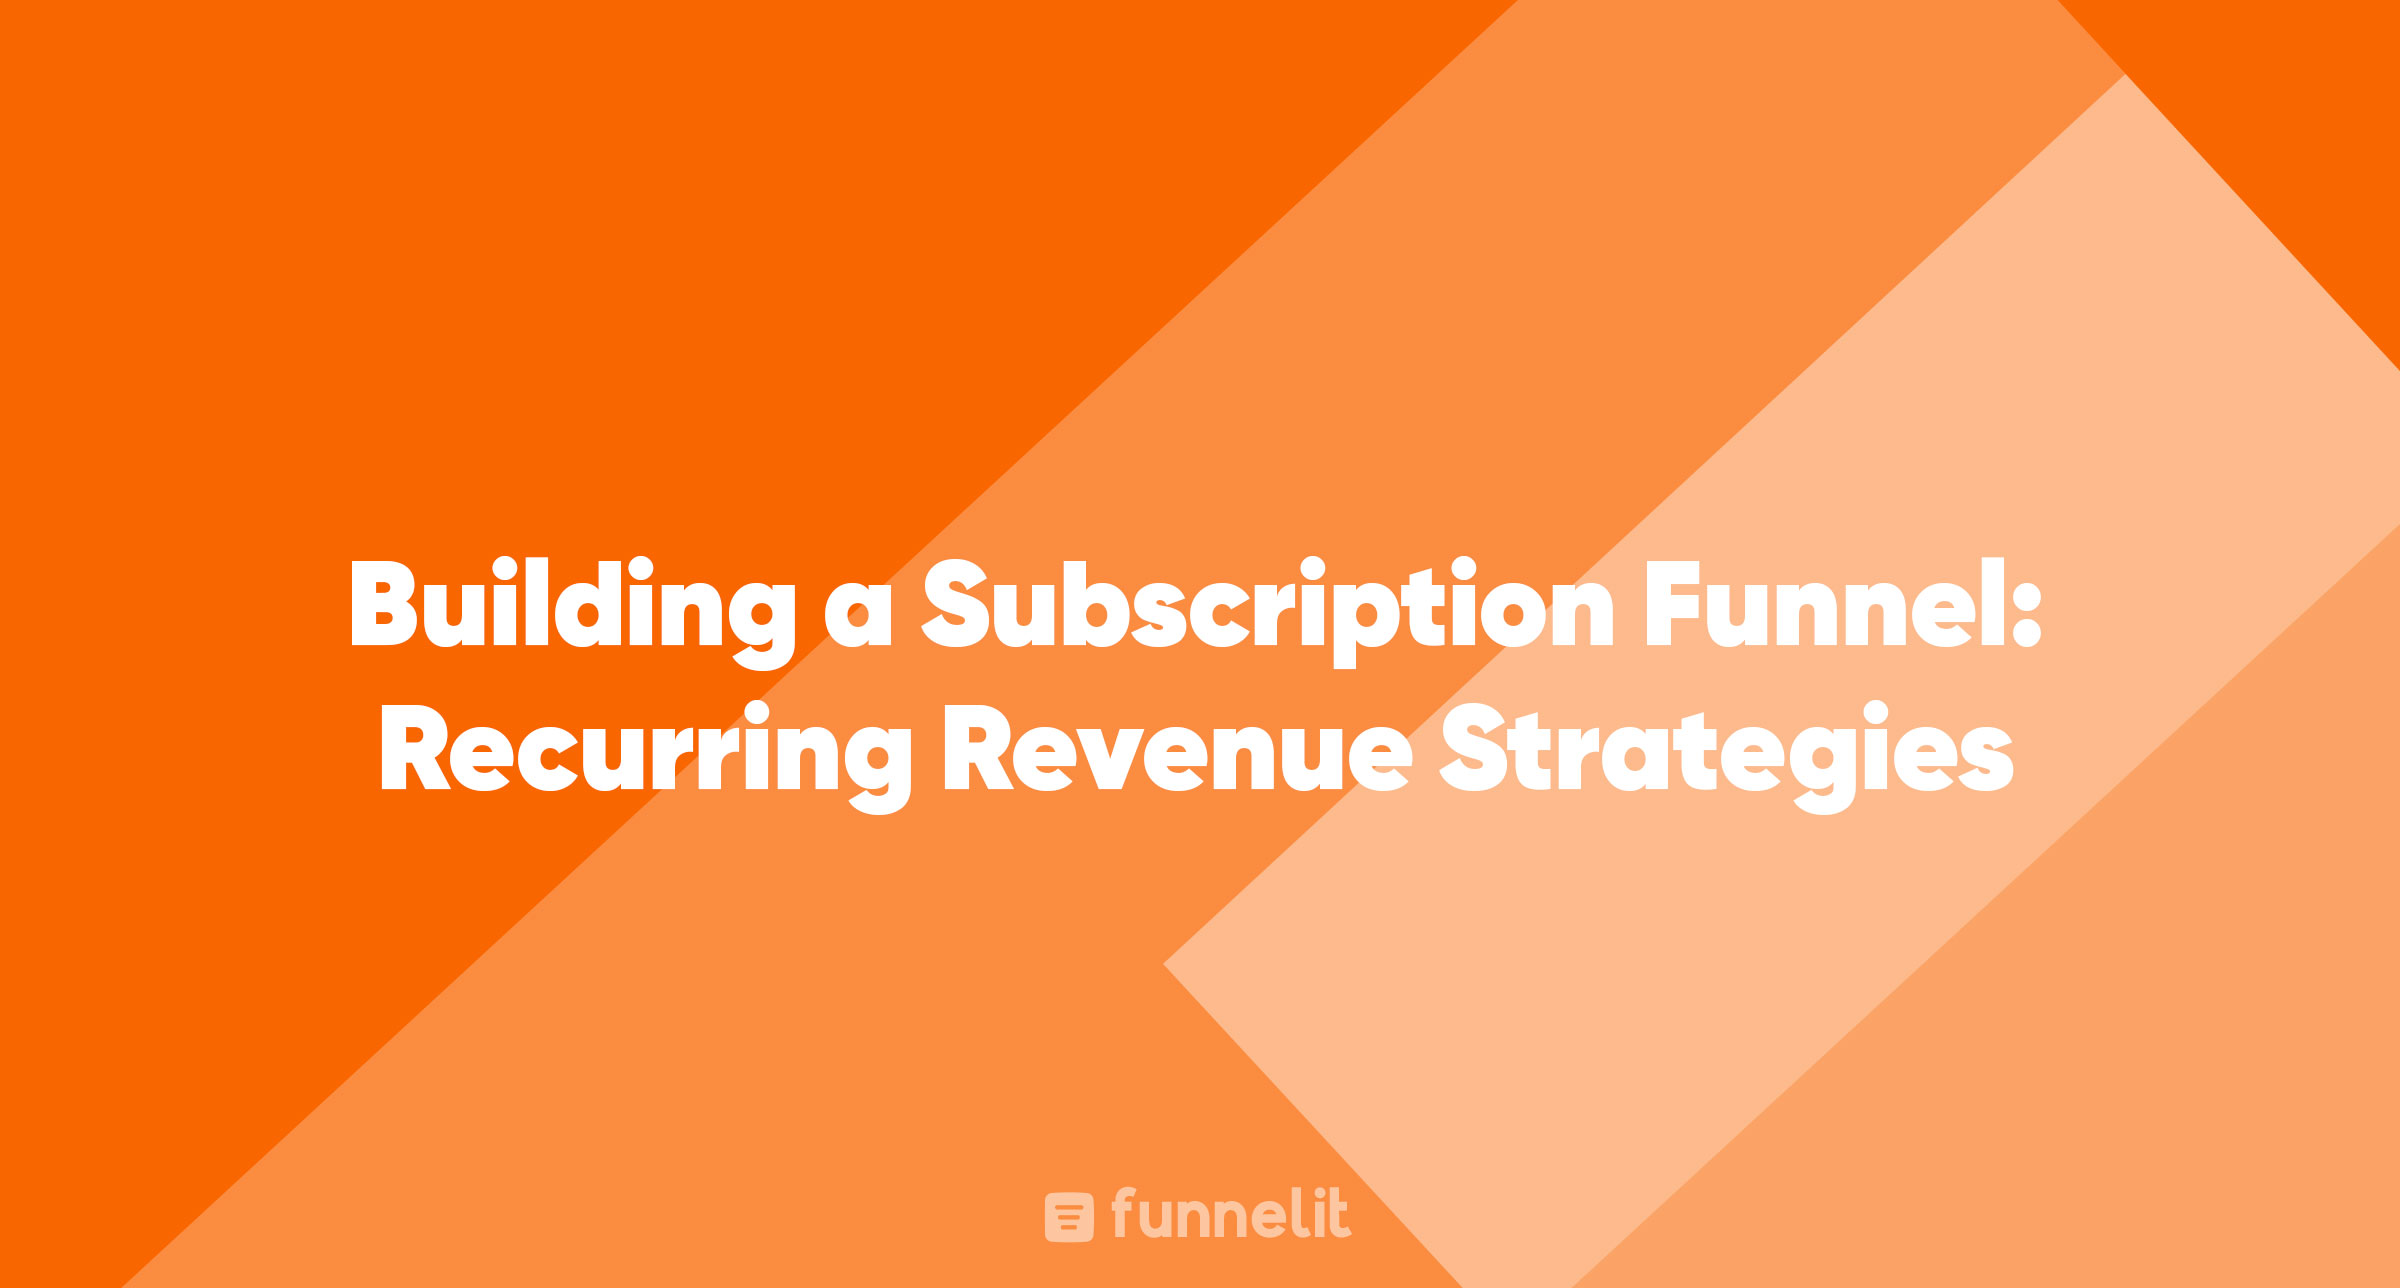 Article | Building a Subscription Funnel: Recurring Revenue Strategies